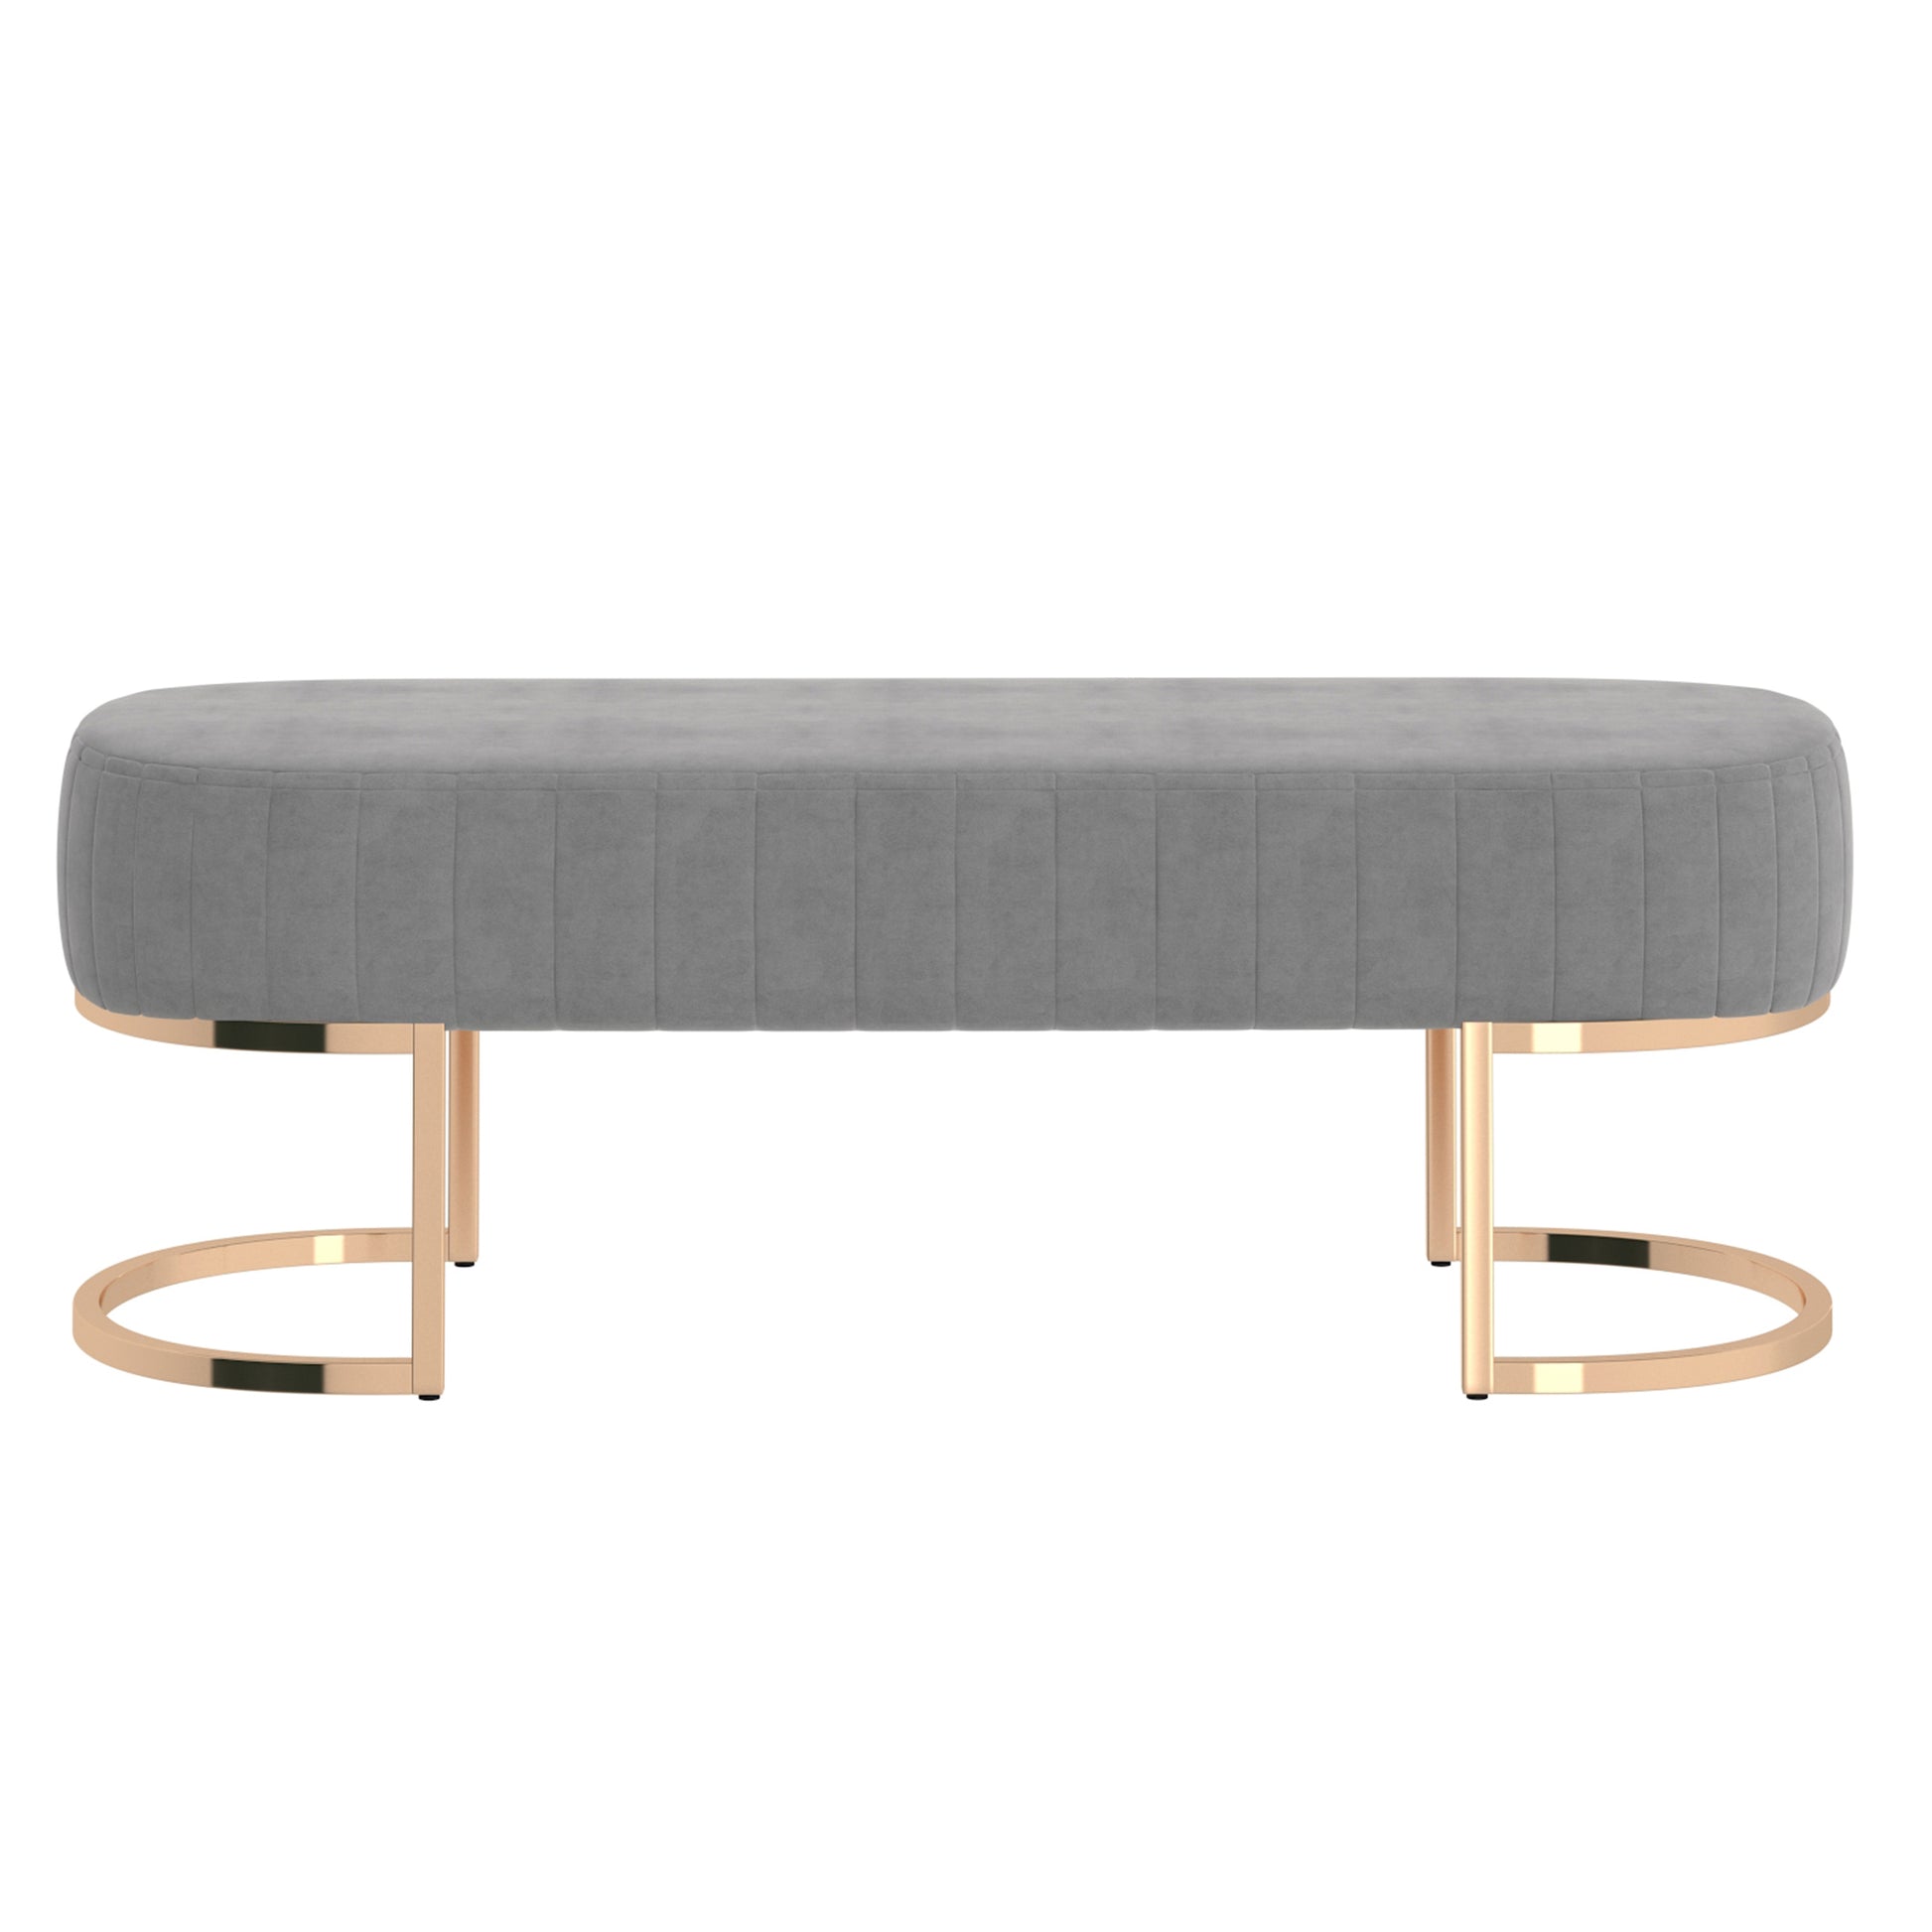 Zamora Bench in Grey with Gold Base - Dreamart Gallery